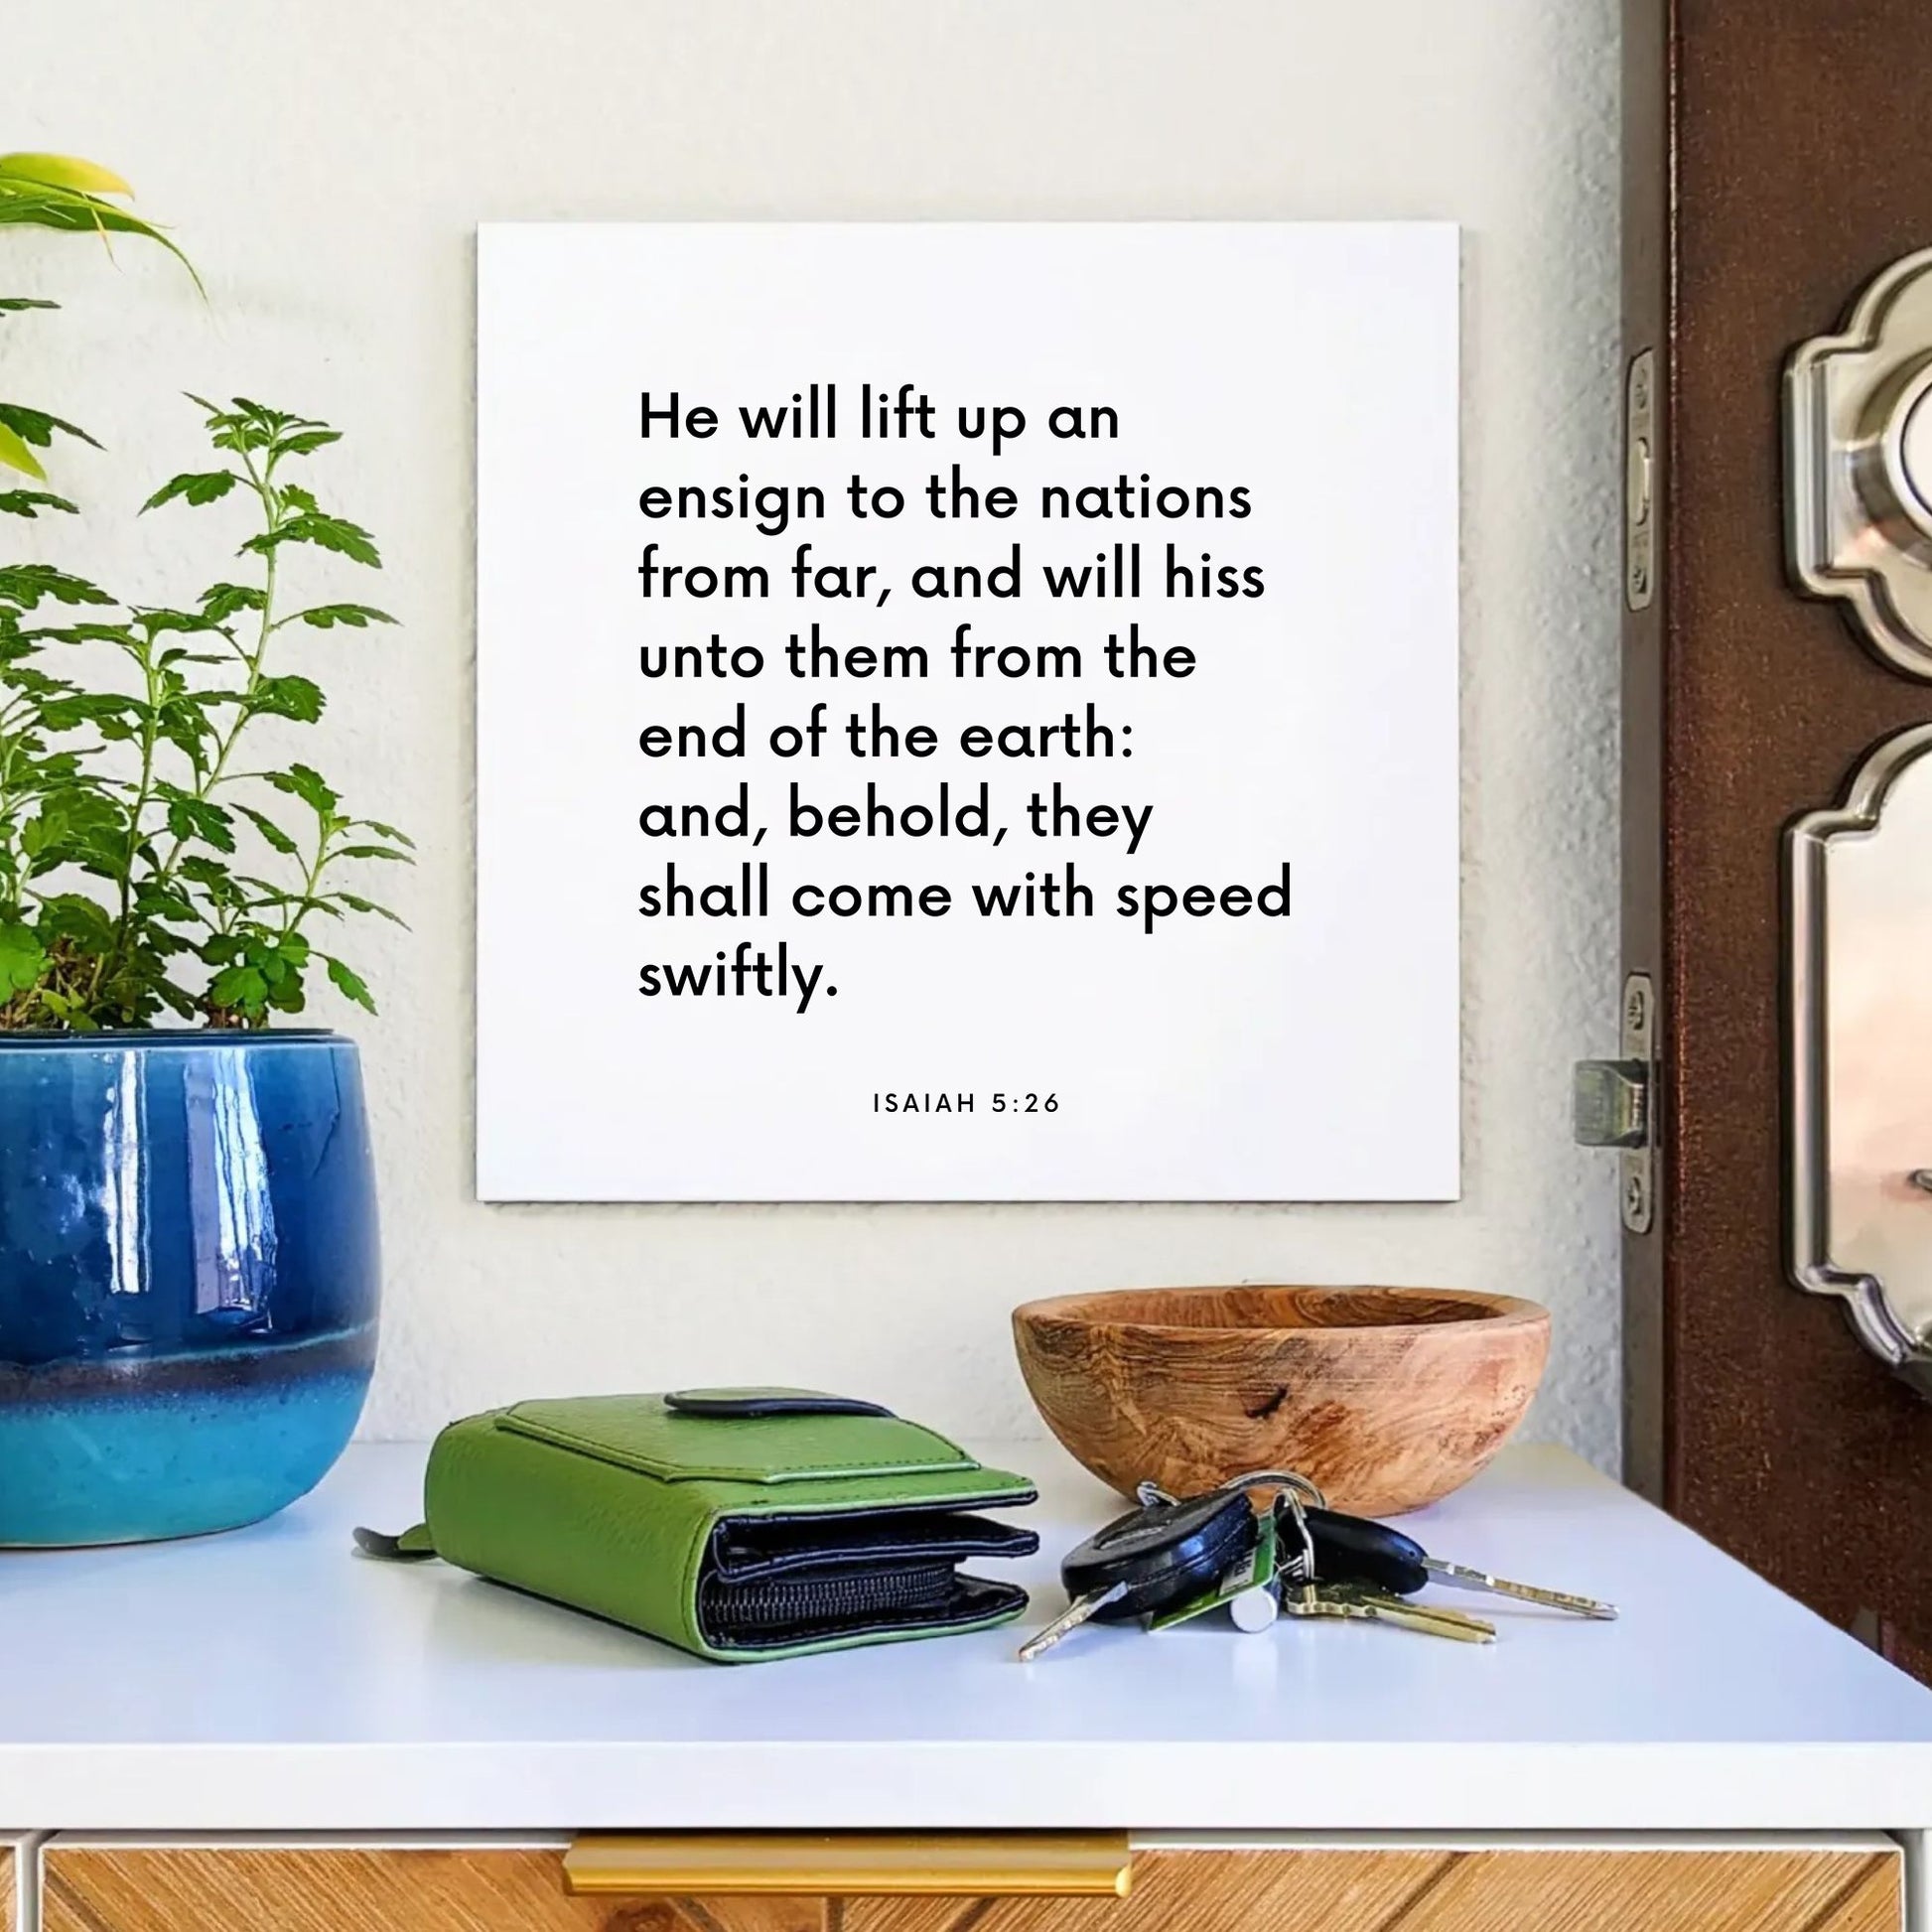 Entryway mouting of the scripture tile for Isaiah 5:26 - "He will lift up an ensign to the nations from far"